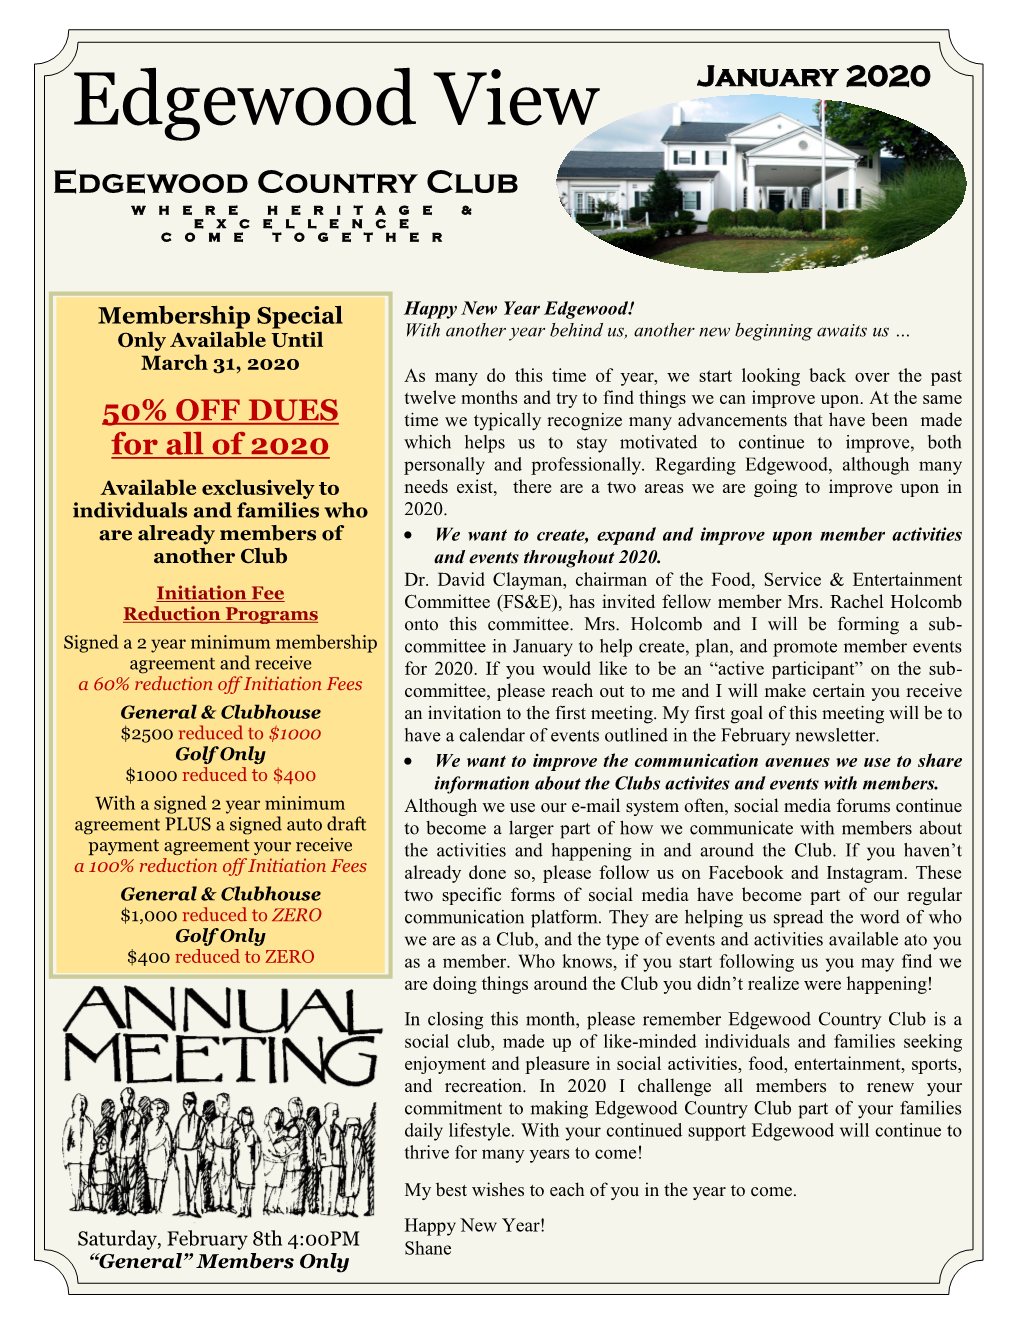 January 2020 Edgewood View Edgewood Country Club WHERE HERITAGE & EXCELLENCE COME TOGETHER